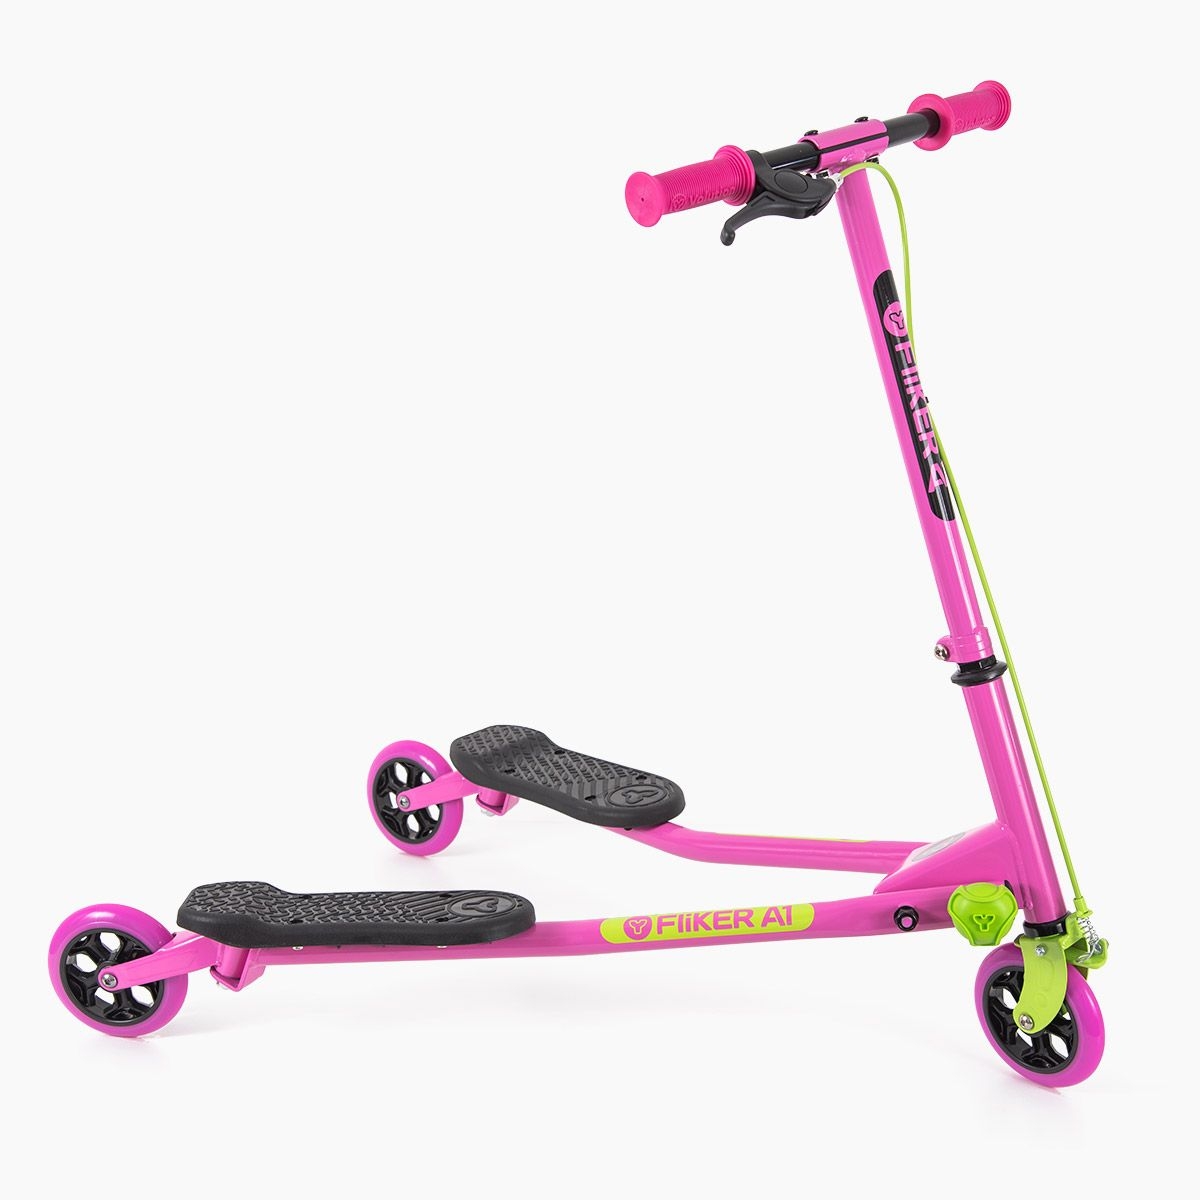 Yvolution Y Fliker Air A1 Kids Drifting Scooter, Pink/Green - 5y+